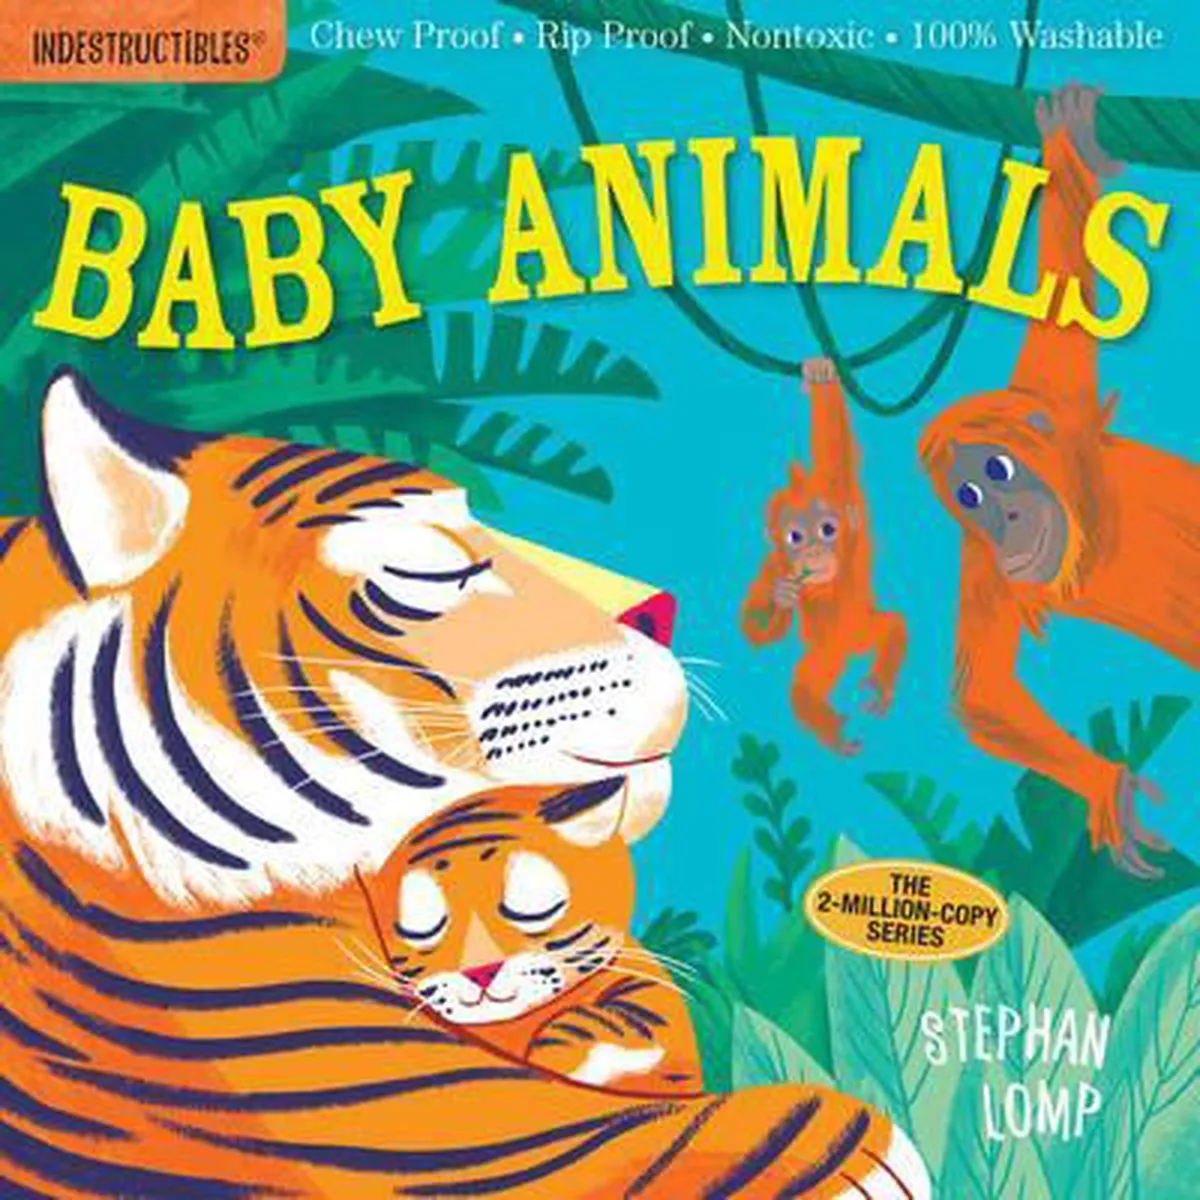 Indestructibles: Baby Animals: Chew Proof - Rip Proof - Nontoxic - 100% Washable (Book for Babies, Newborn Books, Safe to Chew) speelgoed